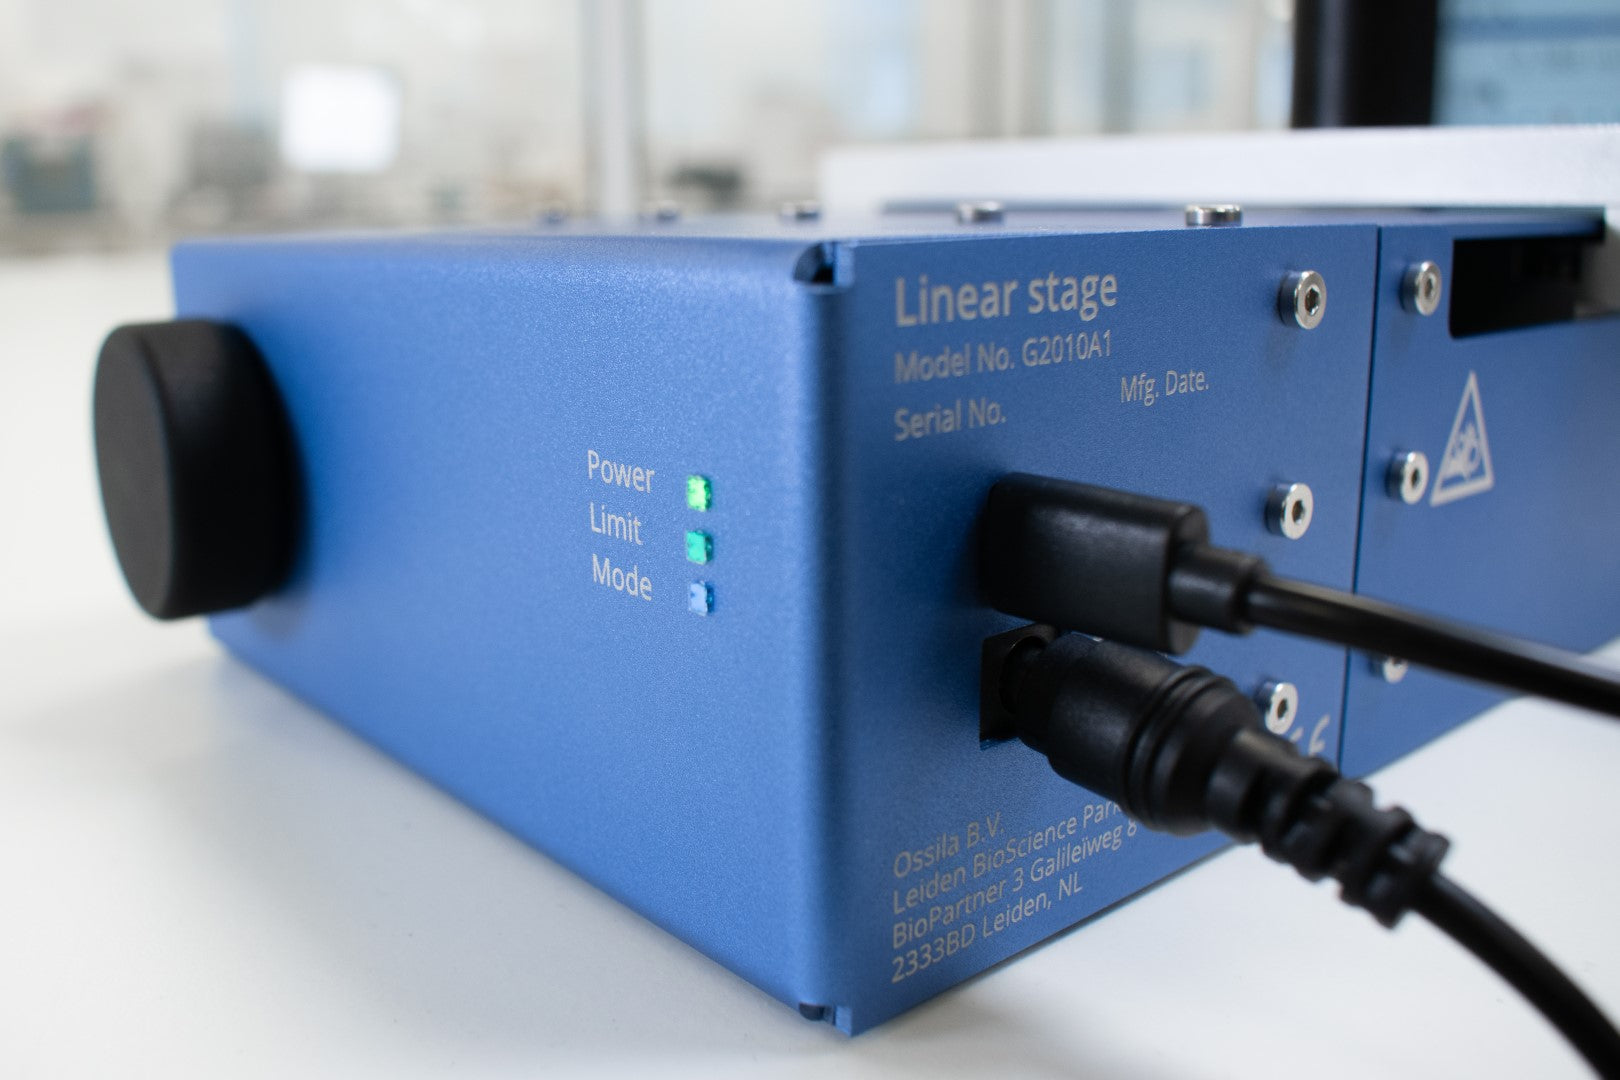 Power supply to linear stage